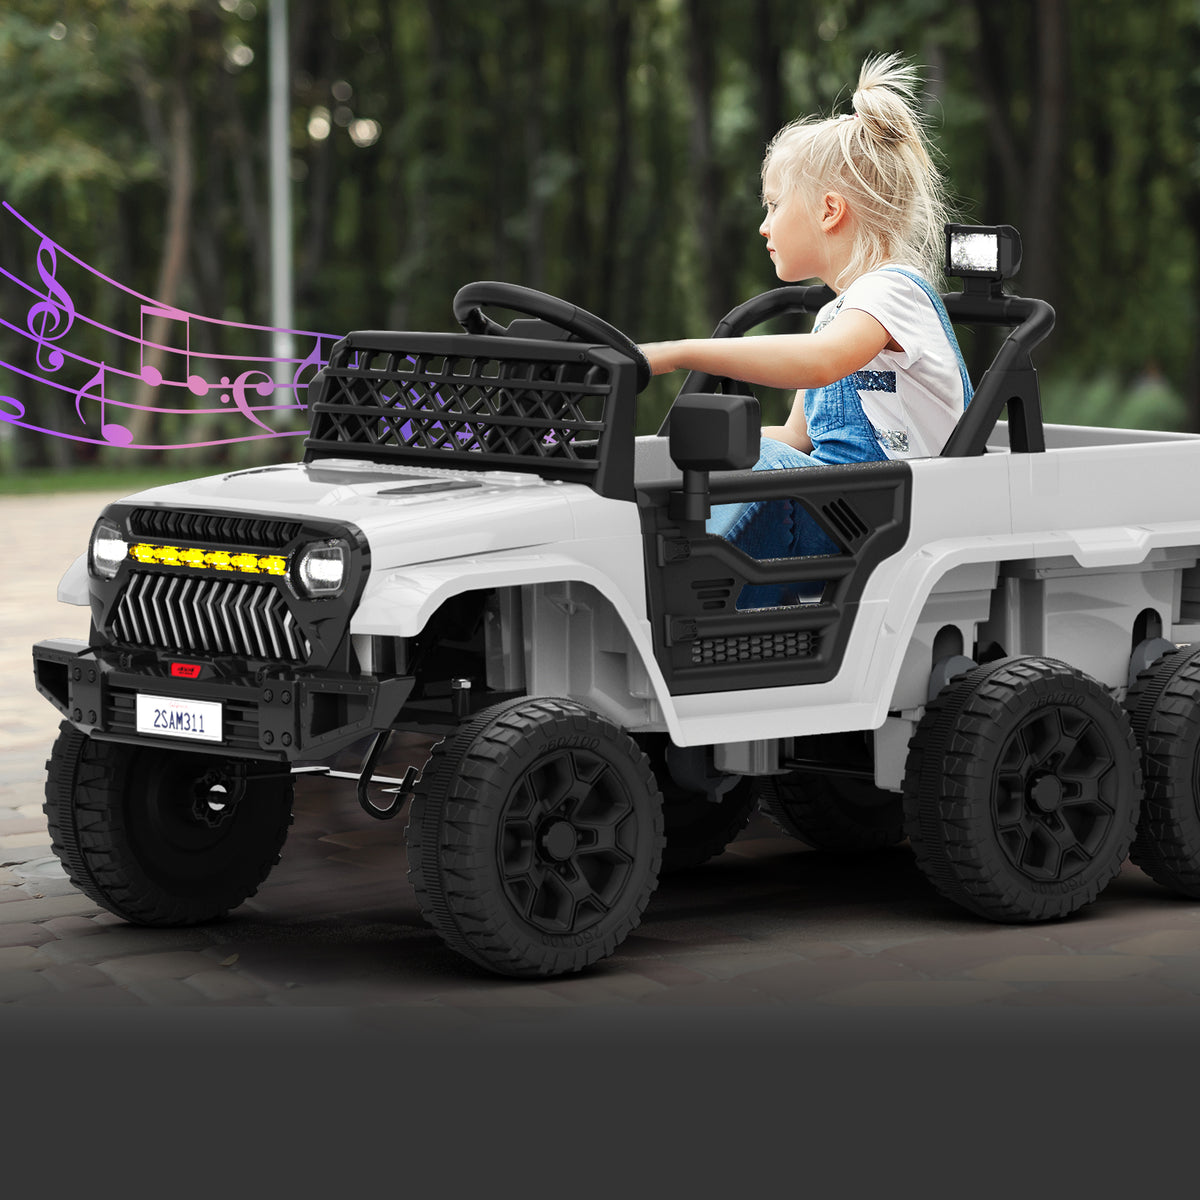 XJD 12V 7AH Ride On Truck Car with Remote Control, 6 Wheels, 2 Seats, Power Car for Kids, White